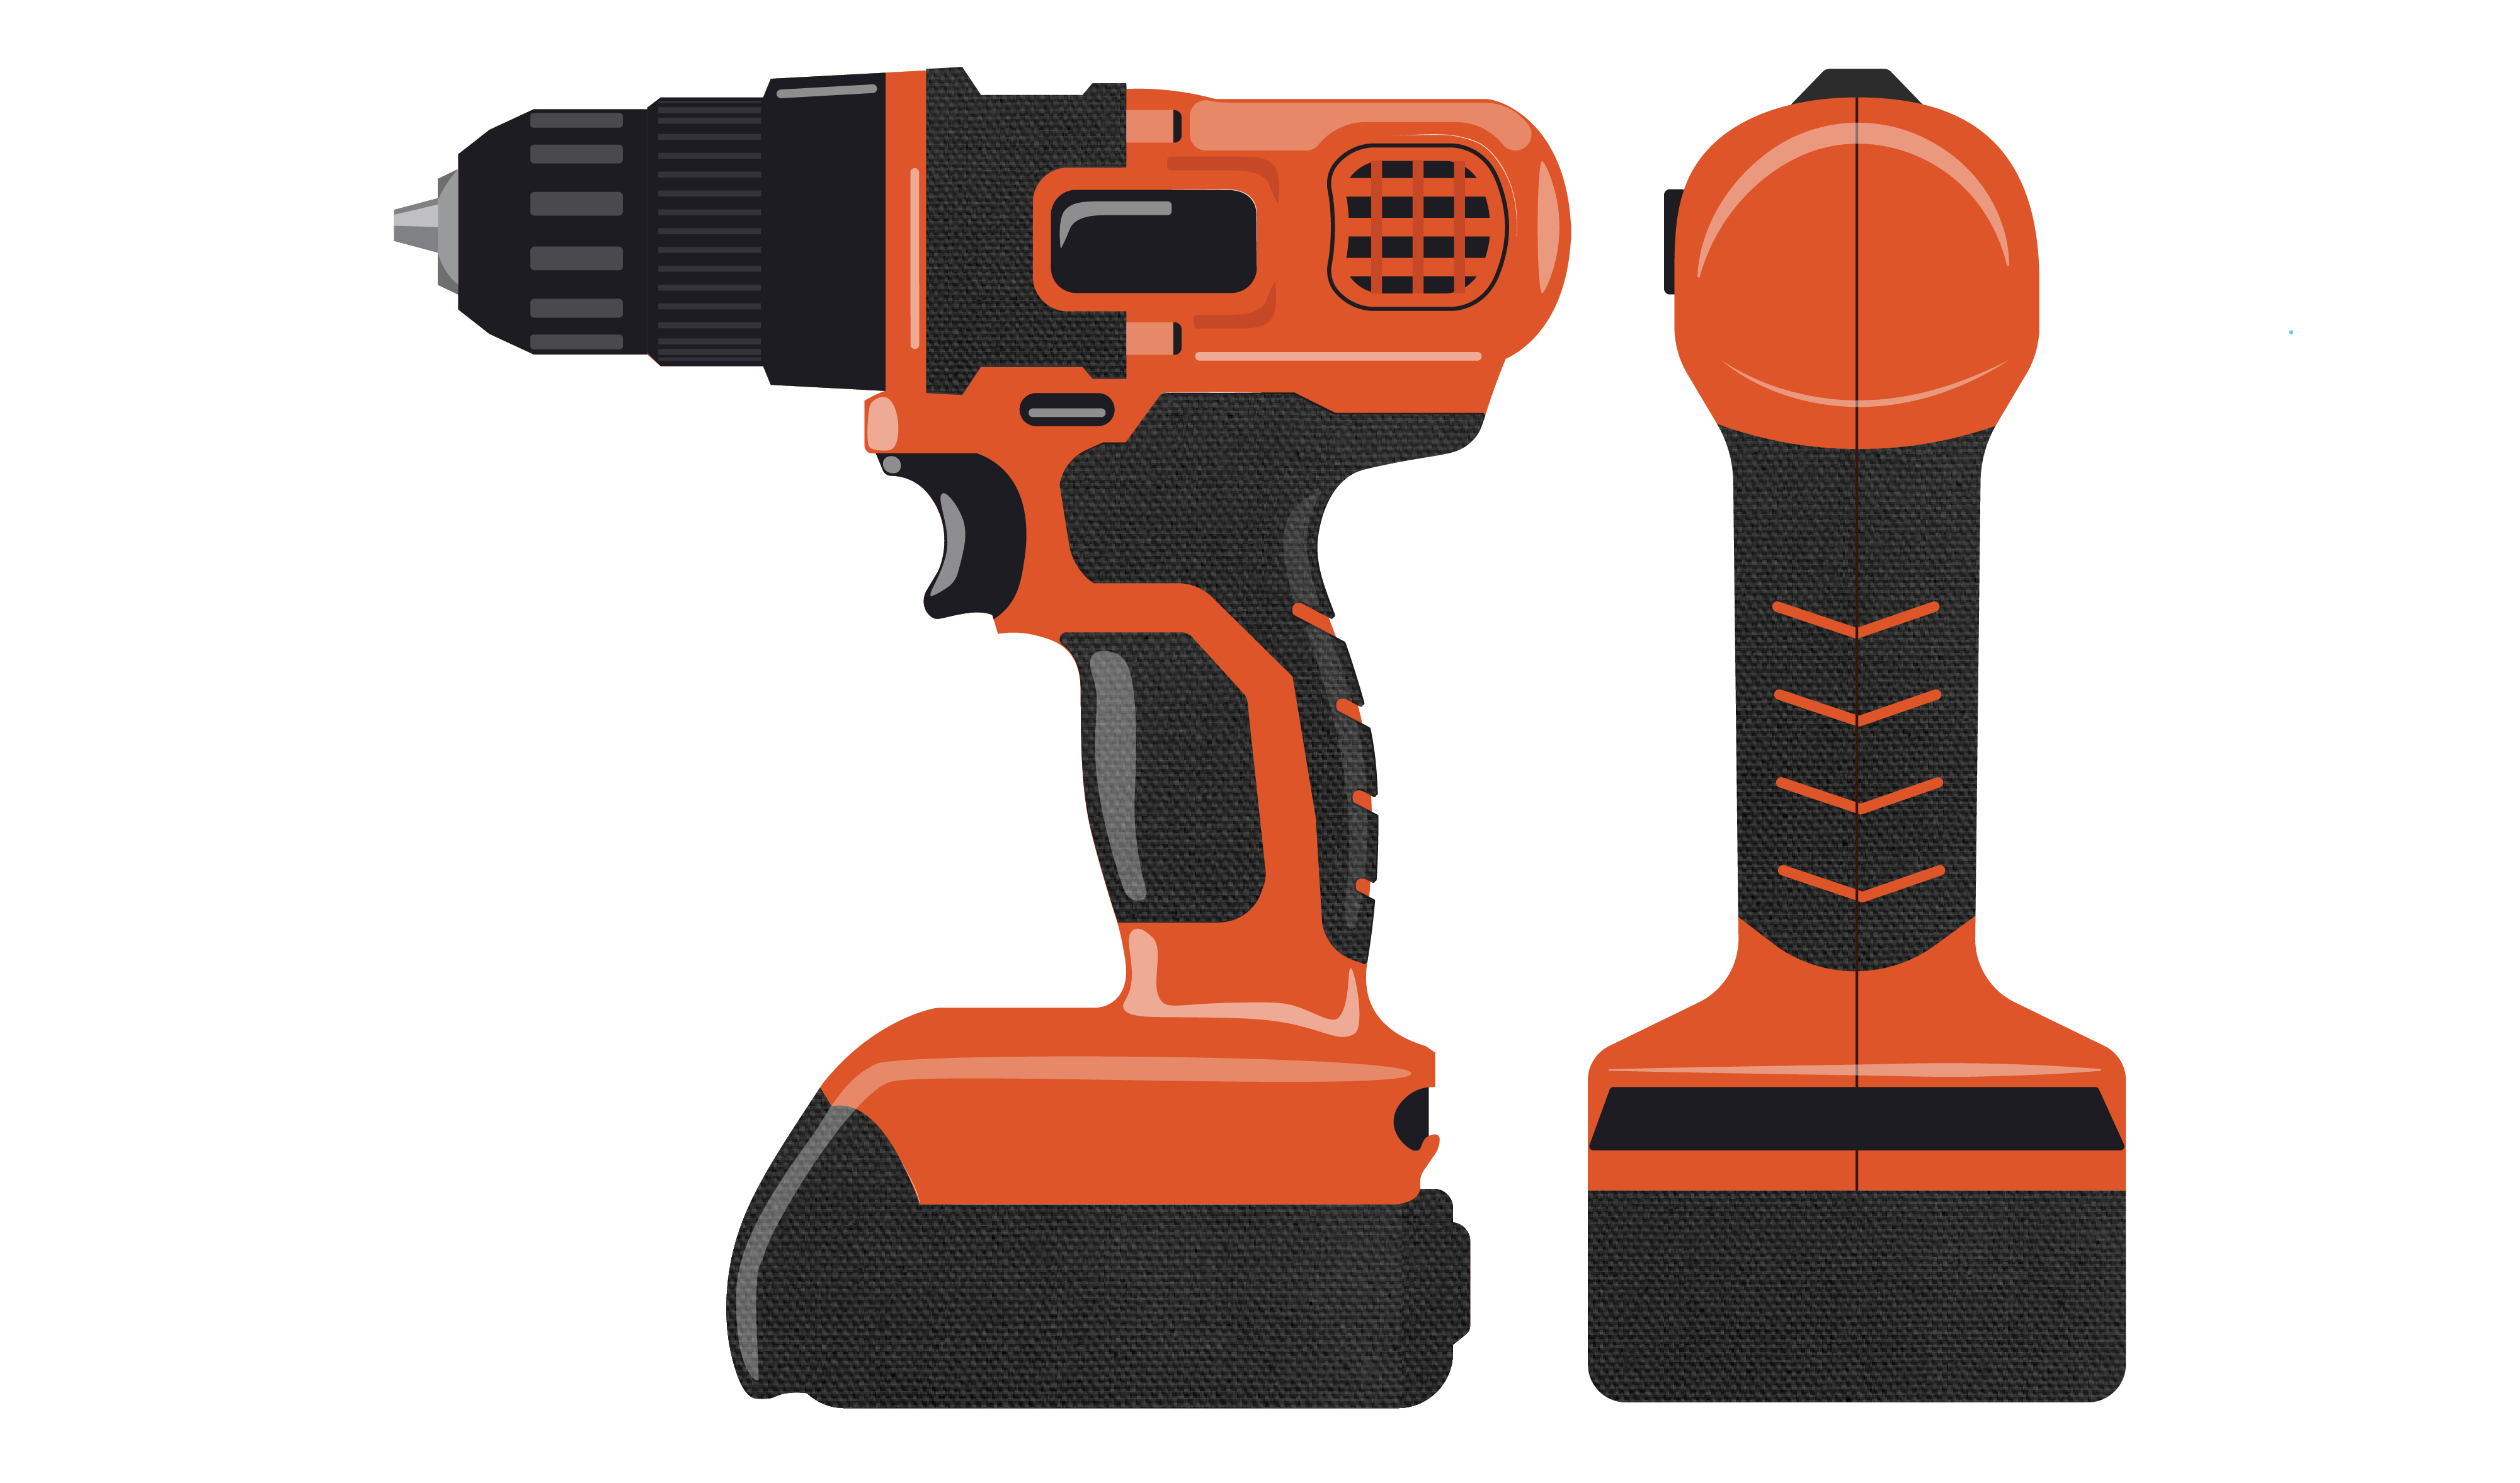 On the left, a side view of an orange and black drill with various textured interaction points. On the right, a back view of the drill to show the parting line.